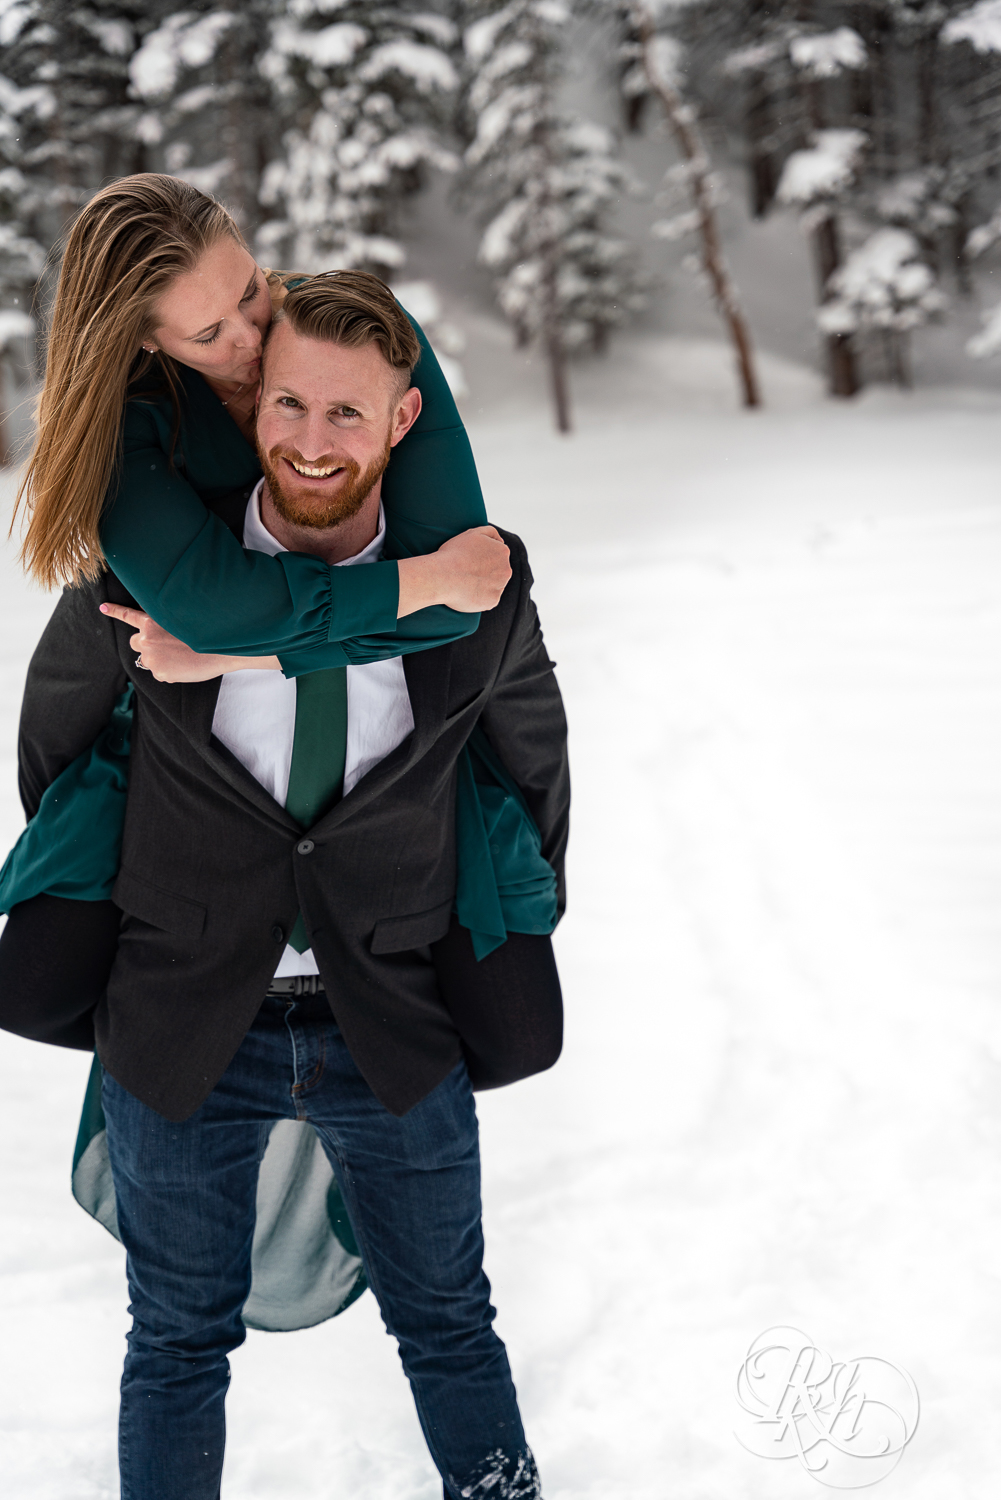 Man in suit and woman in green dress do piggy back ride in snow on Dream Lake in Rocky Mountain National Park, Colorado.